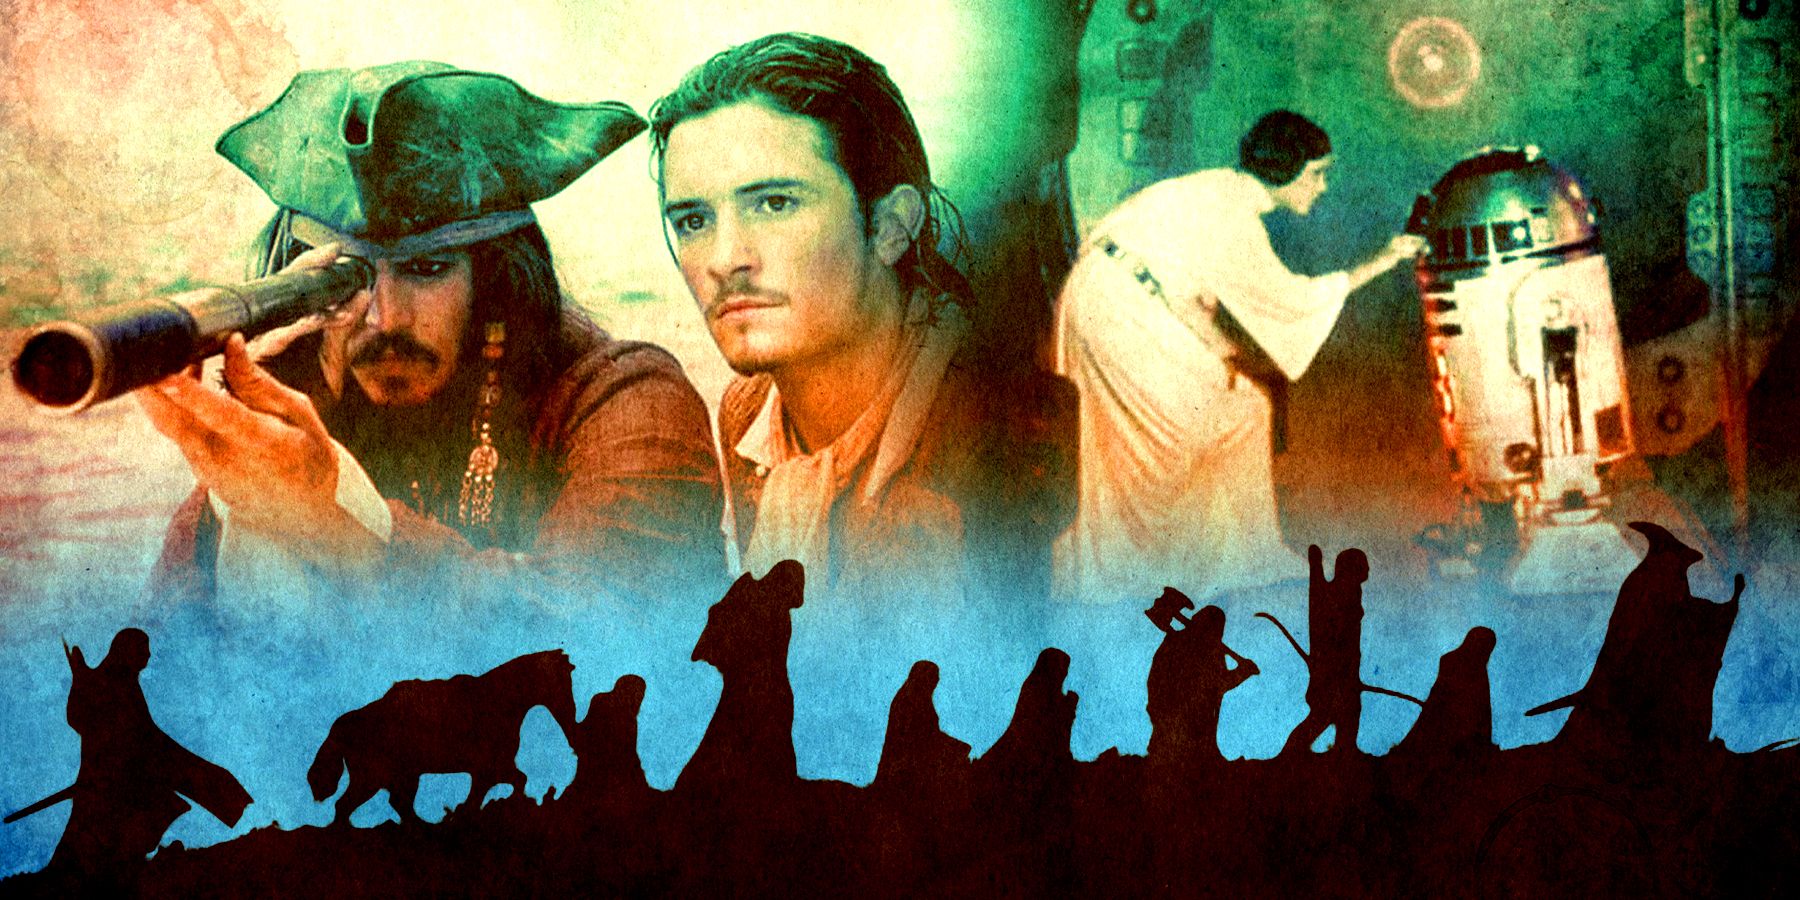 Jack Sparrow and Will turner from Pirates of the Caribbean, Princess Leia and R2-D2 from Star Wars: A New Hope and silhouettes of the fellowship from The Lord of the Rings: The Fellowship of the Ring